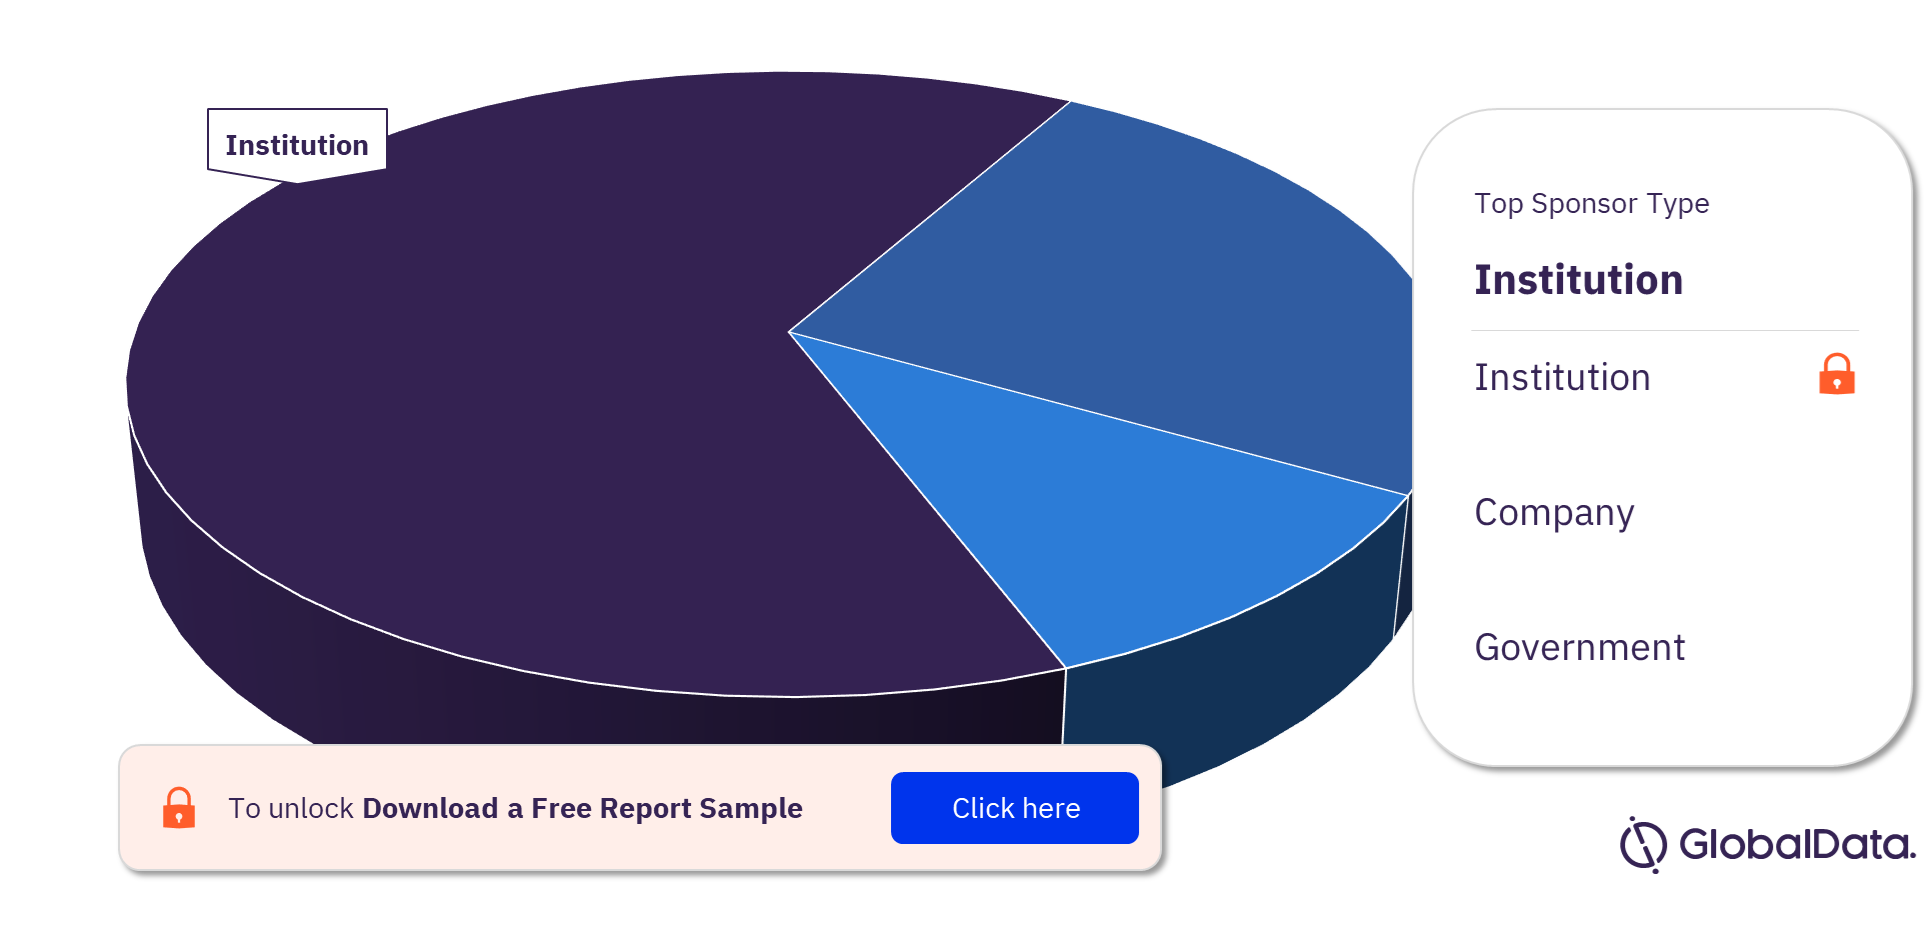 Frozen Shoulder Syndrome Clinical Trials Market Analysis by Sponsor Types, 2023 (%)